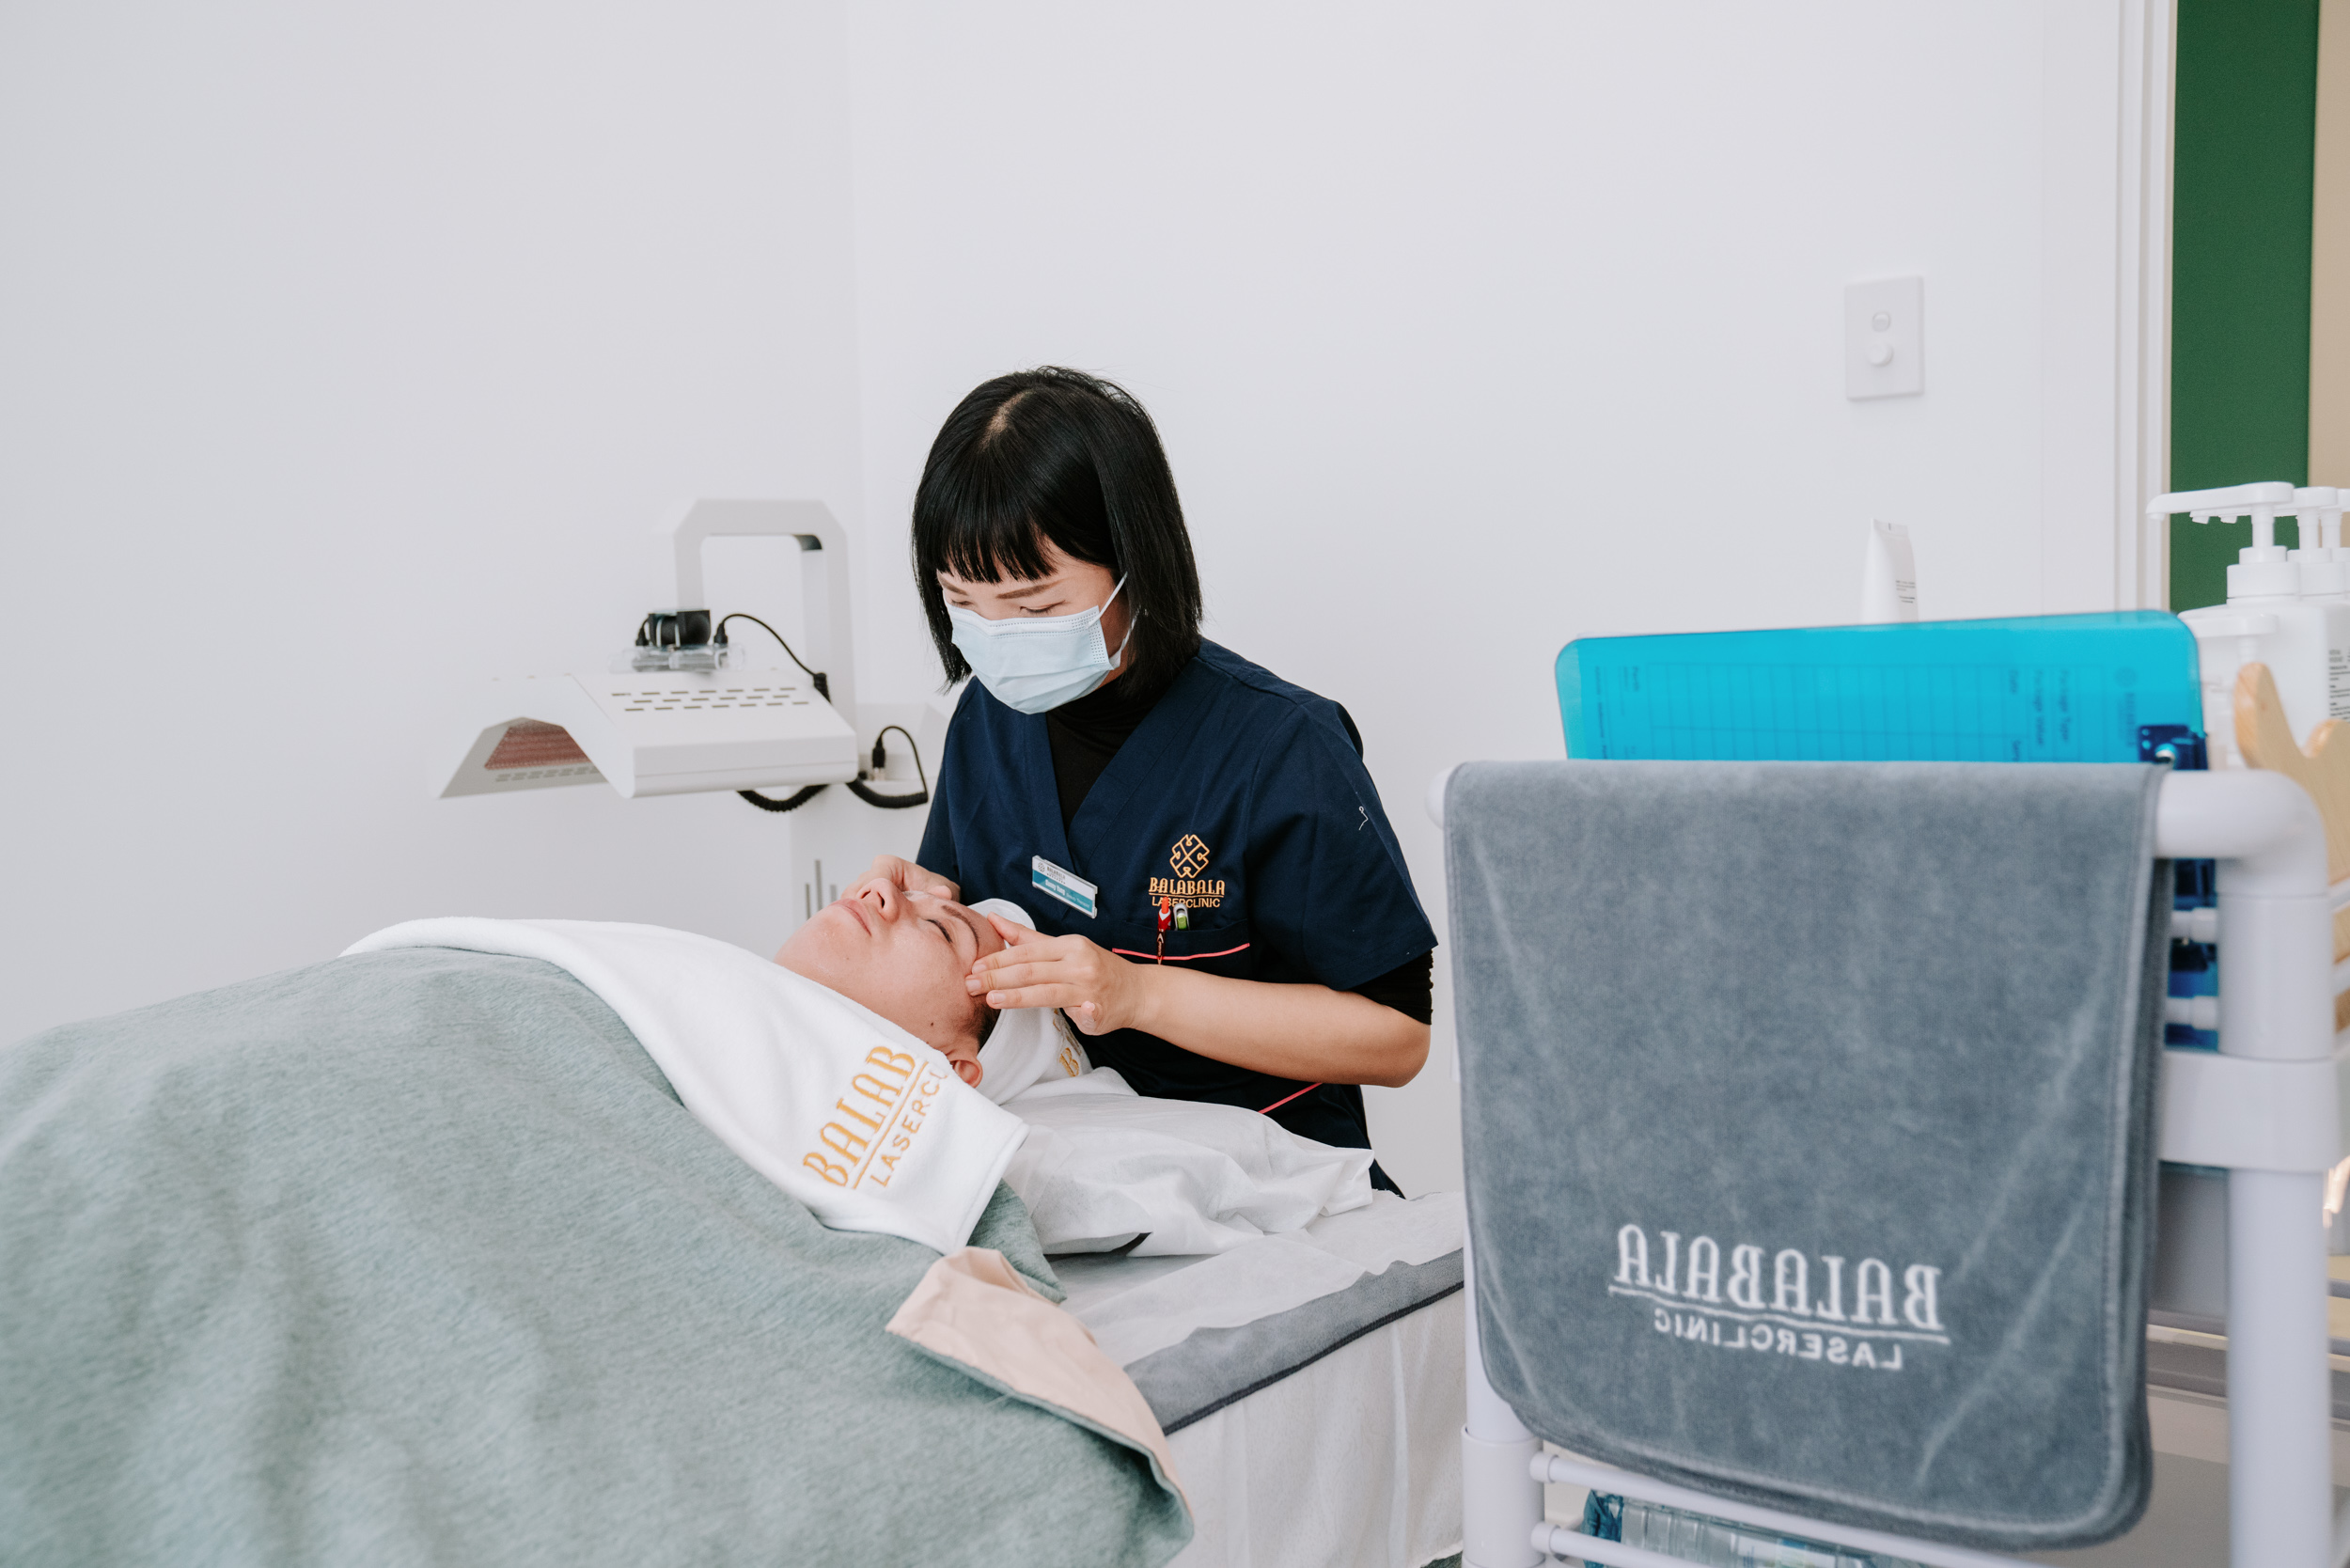 WIN a facial for you and your bestie at BalaBala Skin Laser Clinic!